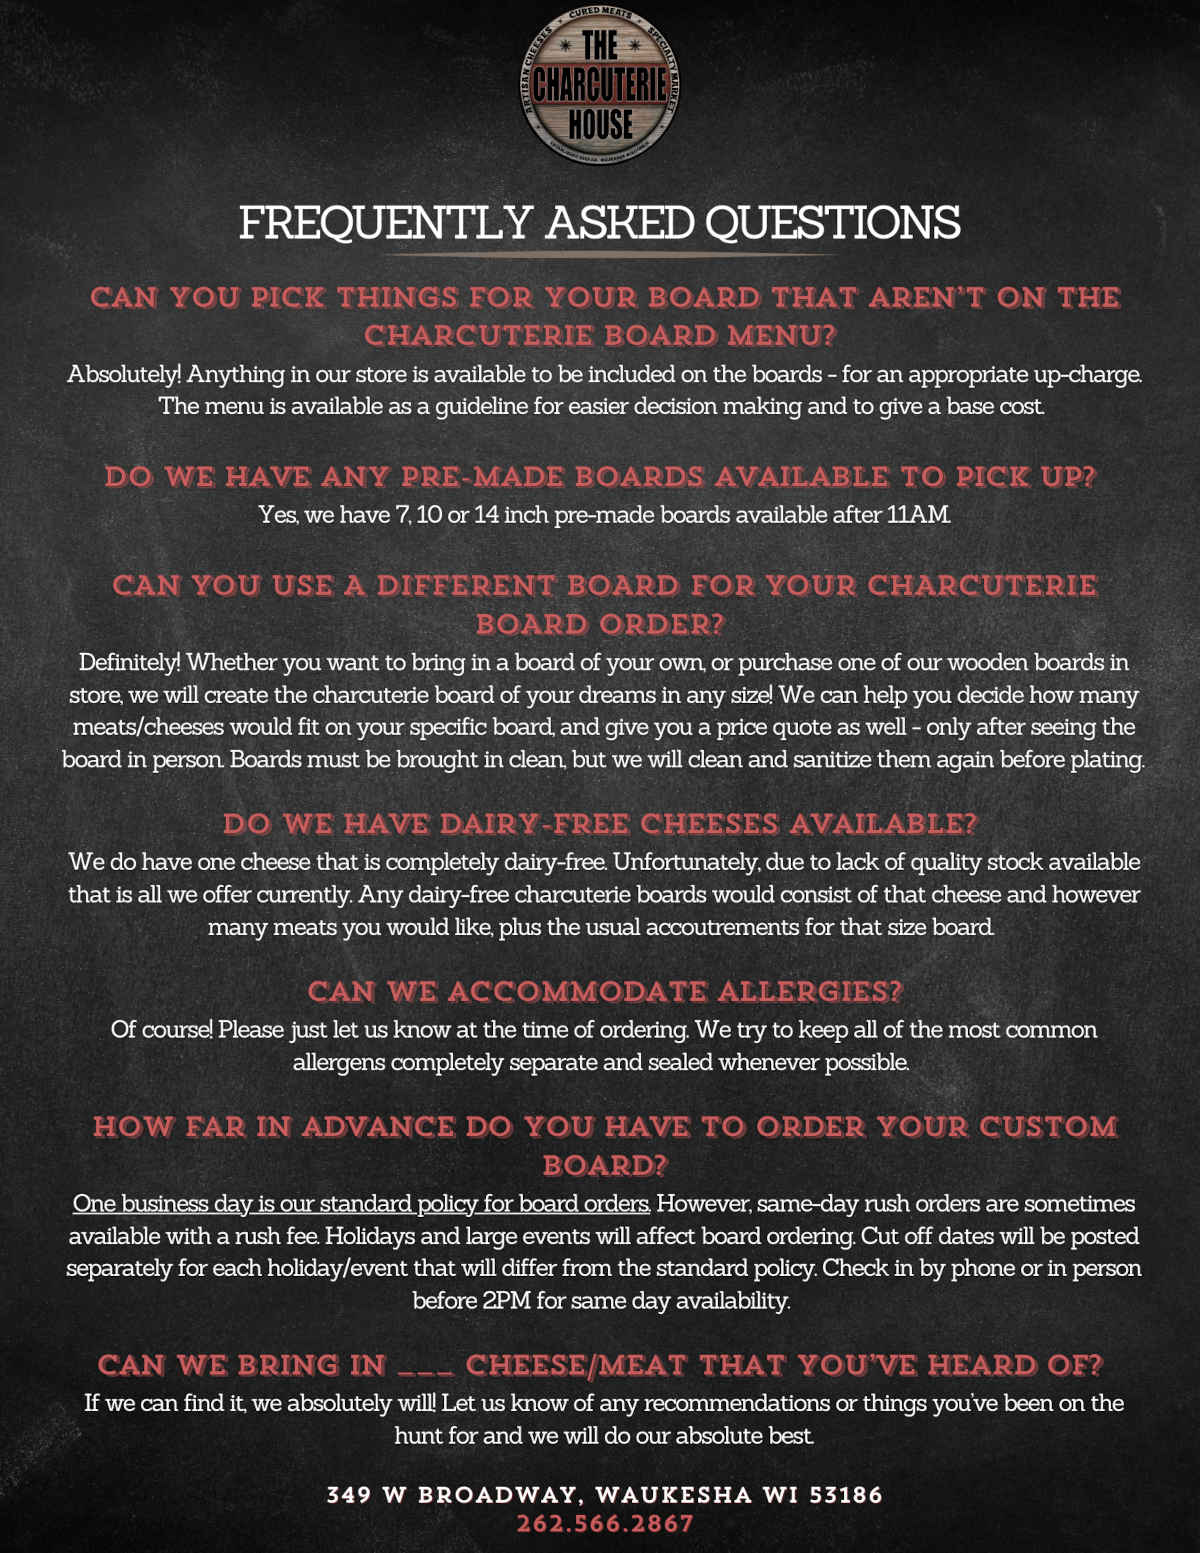 Frequently Asked Questions poster